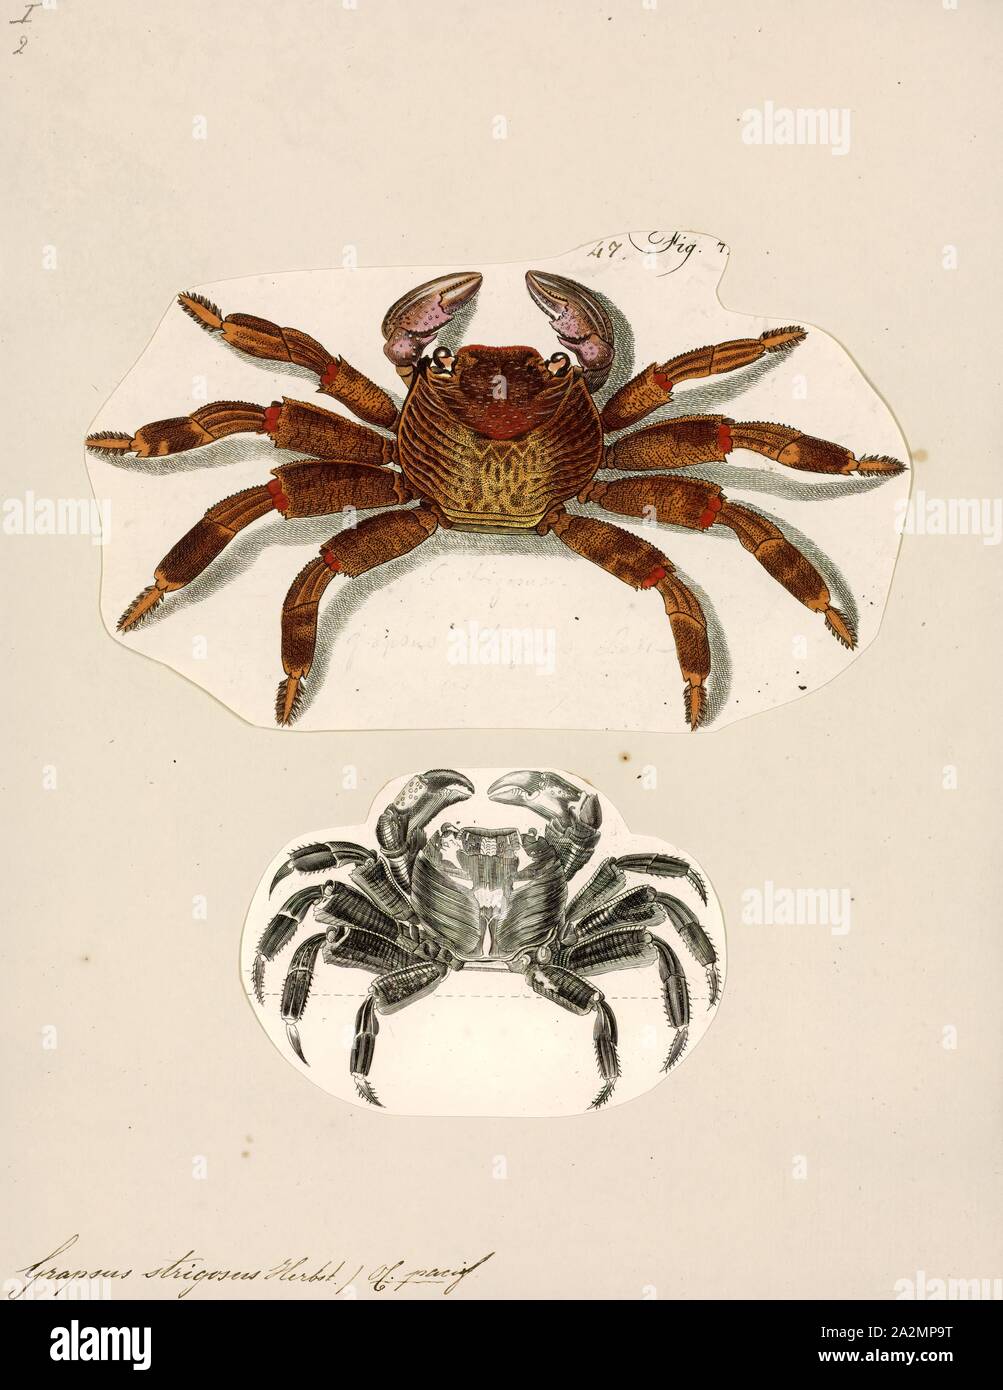 Grapsus strigosus, Print, Grapsus is a genus of lightfoot crabs, comprising the following species:'Grapsus' is a New Latin modification of Greek 'grapsaios' meaning 'crab Stock Photo